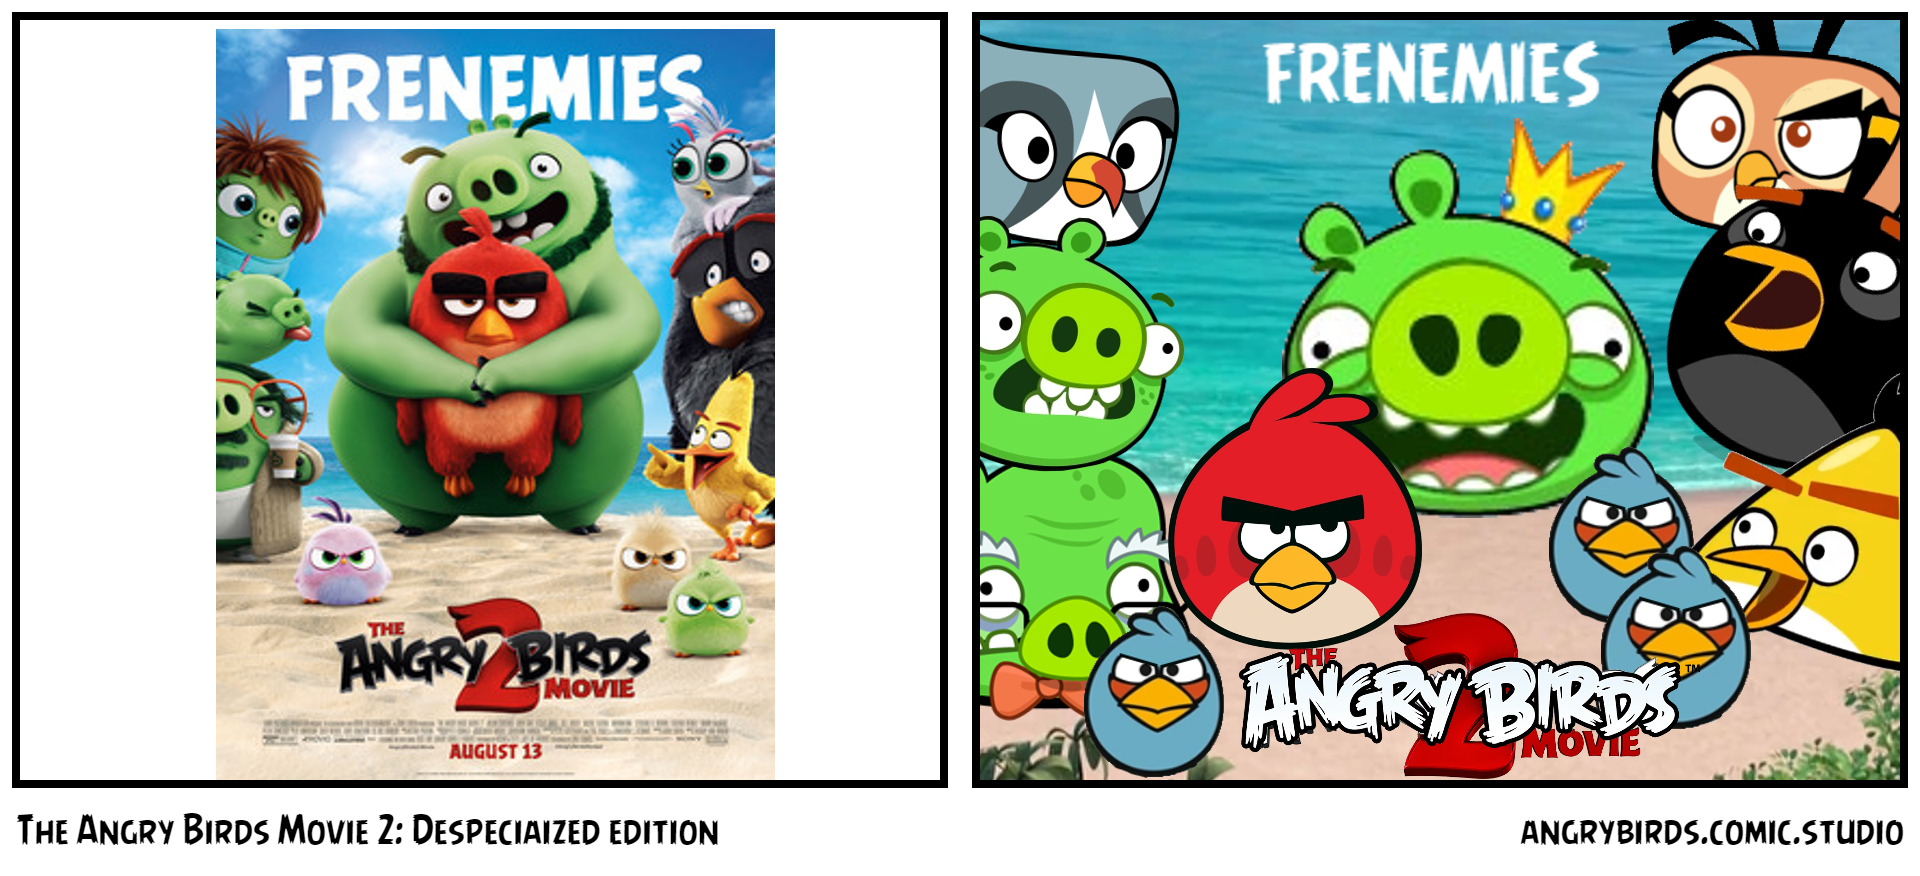 The Angry Birds Movie 2: Despeciaized edition